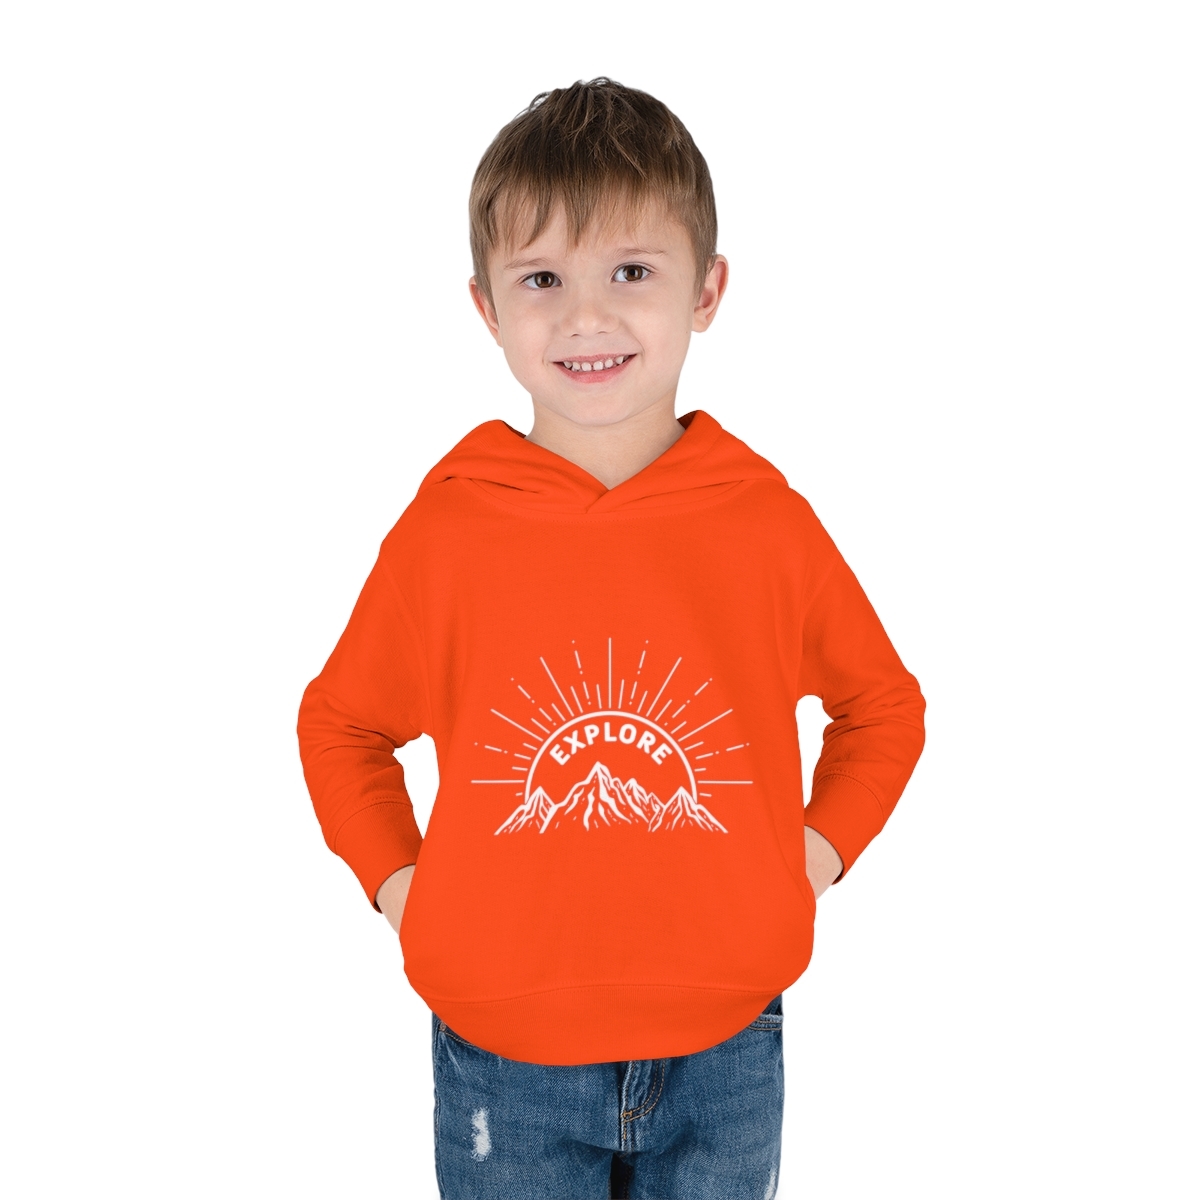 Primary image for Toddler Pullover Fleece Hoodie: Explore Mountains Design